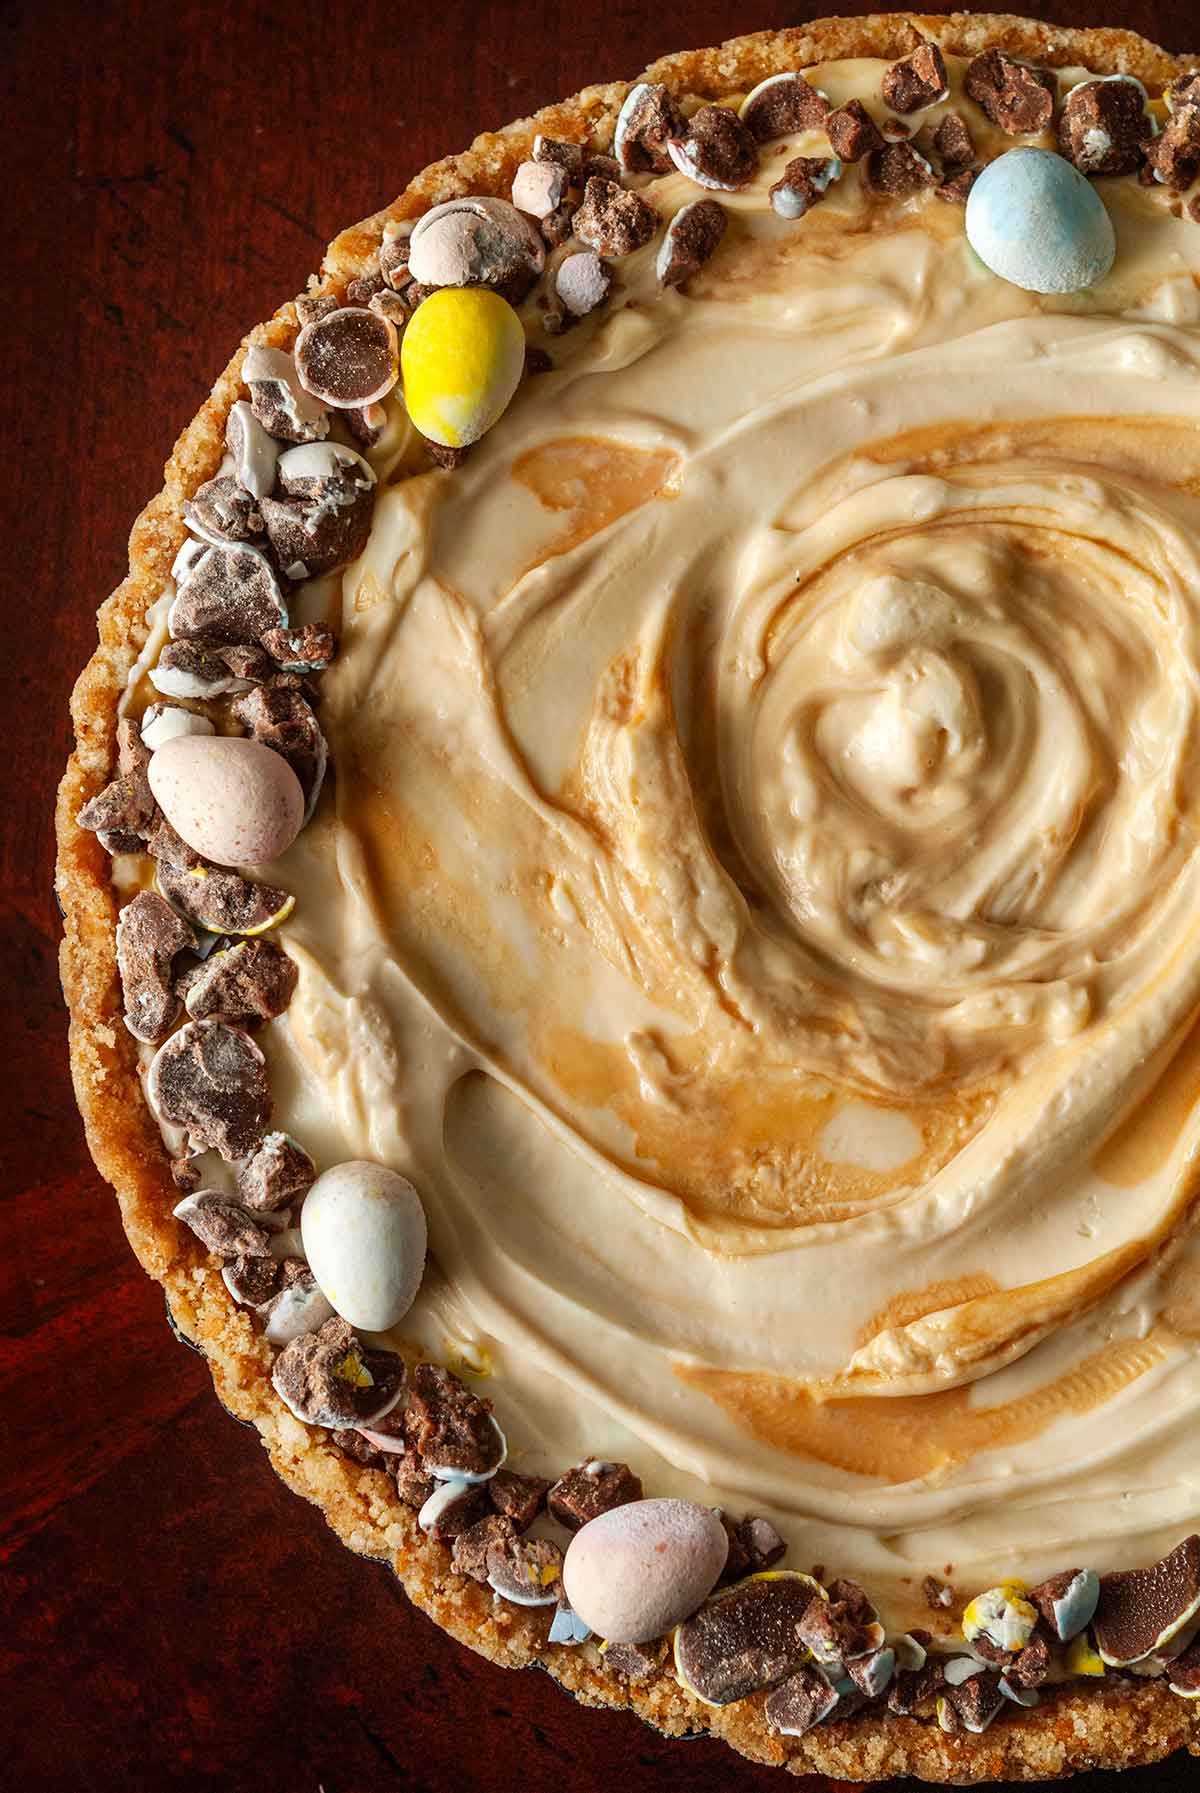 A cheesecake, swirled with caramel, and garnished with little chocolate eggs around the edges.